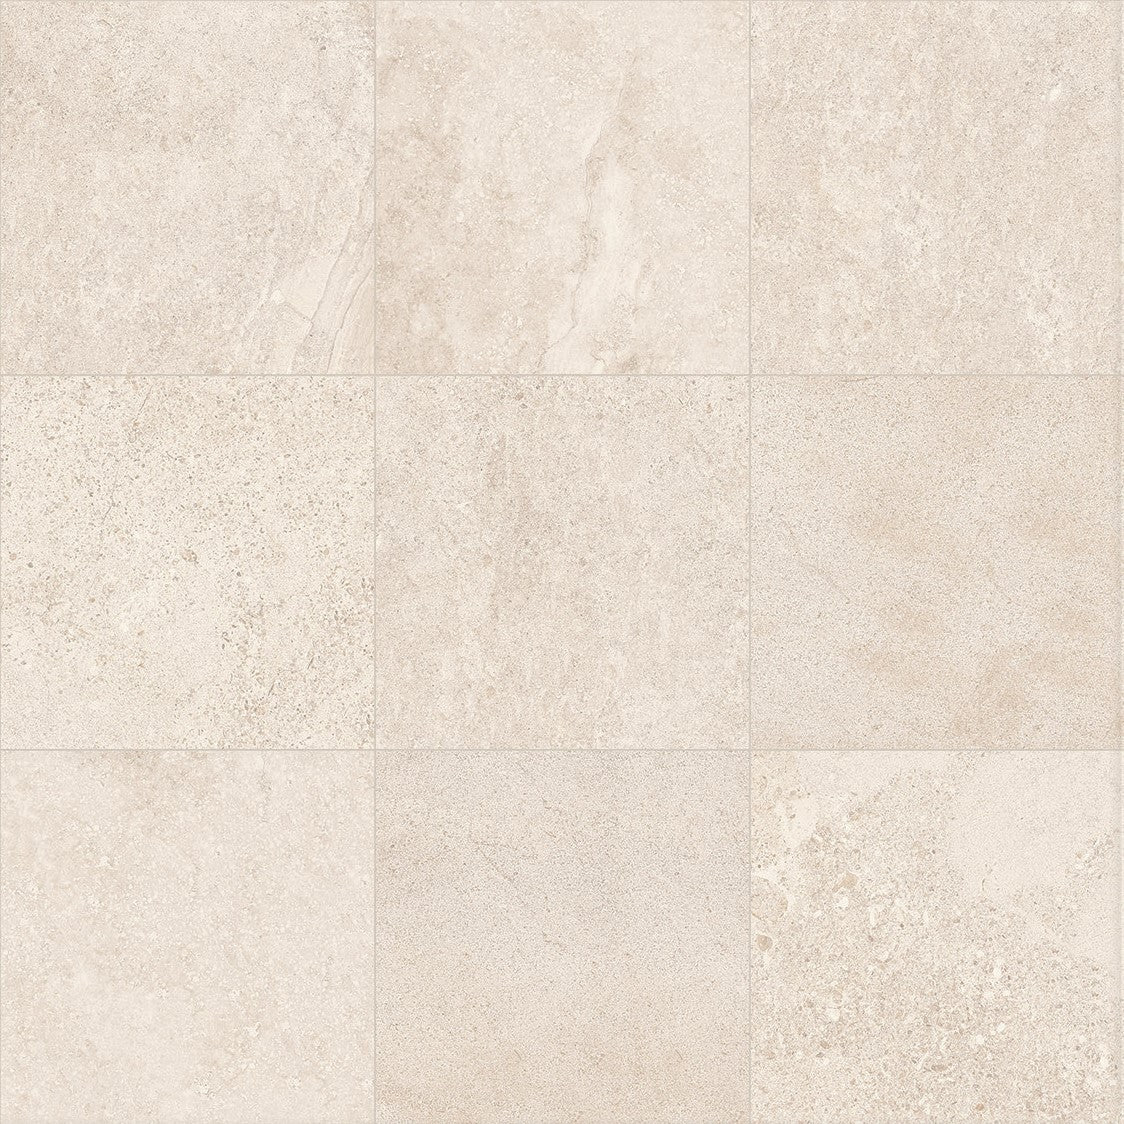 surface group international frontier 20 porcelain paving tile limestone beige 12x12 for outdoor application manufactured by landmark